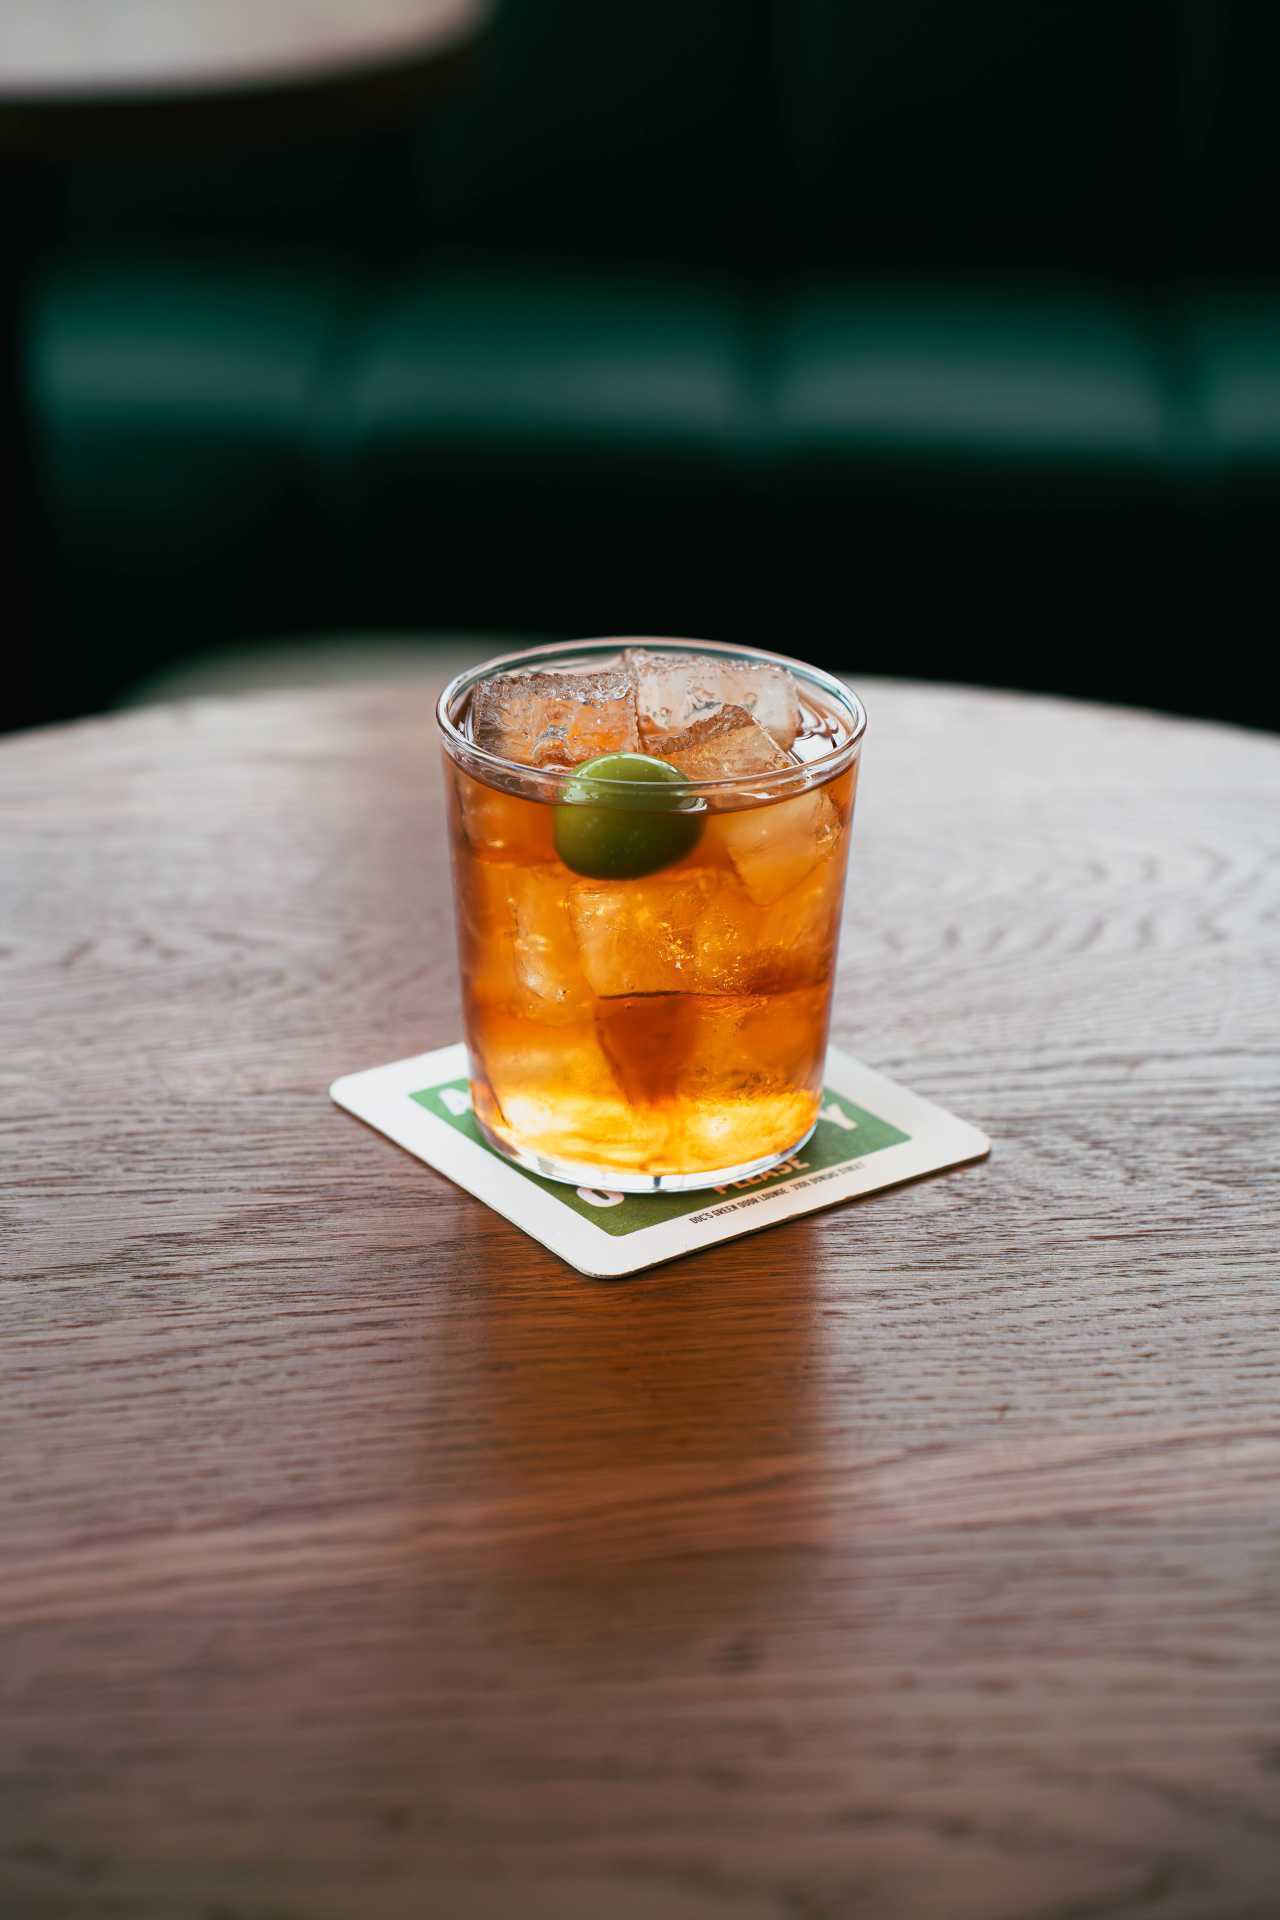 Doc’s Green Door Lounge | A spin on the old fashioned using rum at Doc’s Green Door Lounge